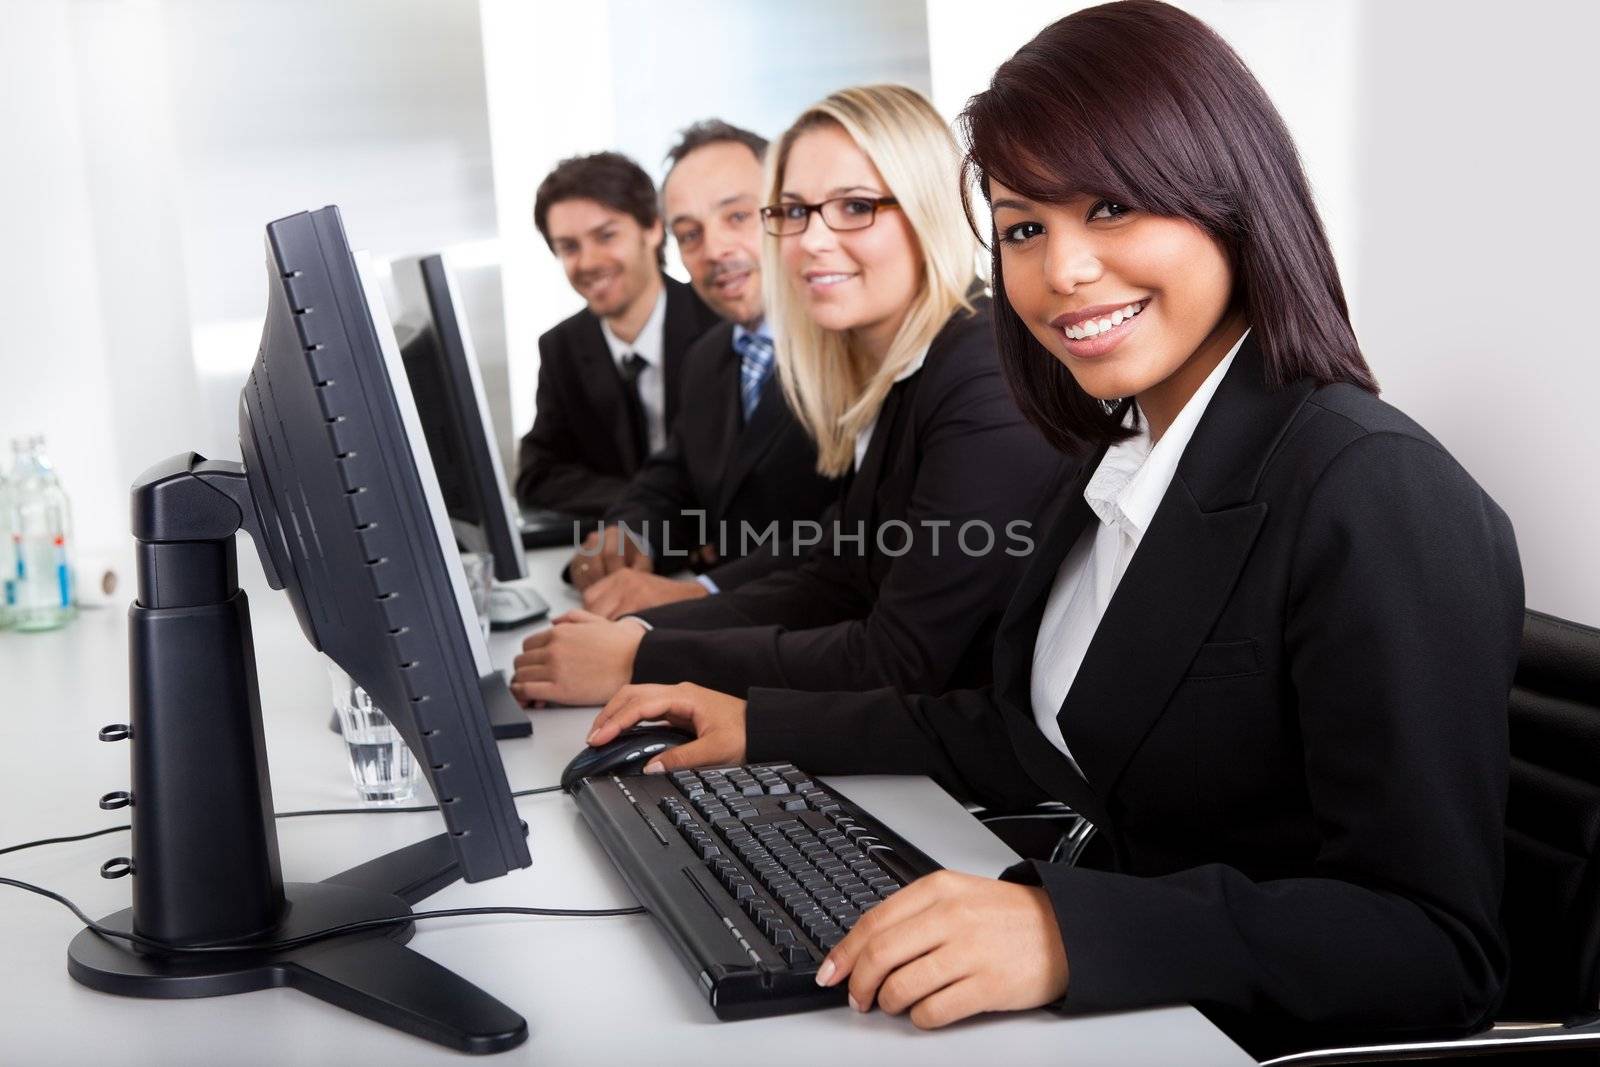 Group of business people in the office working on computers